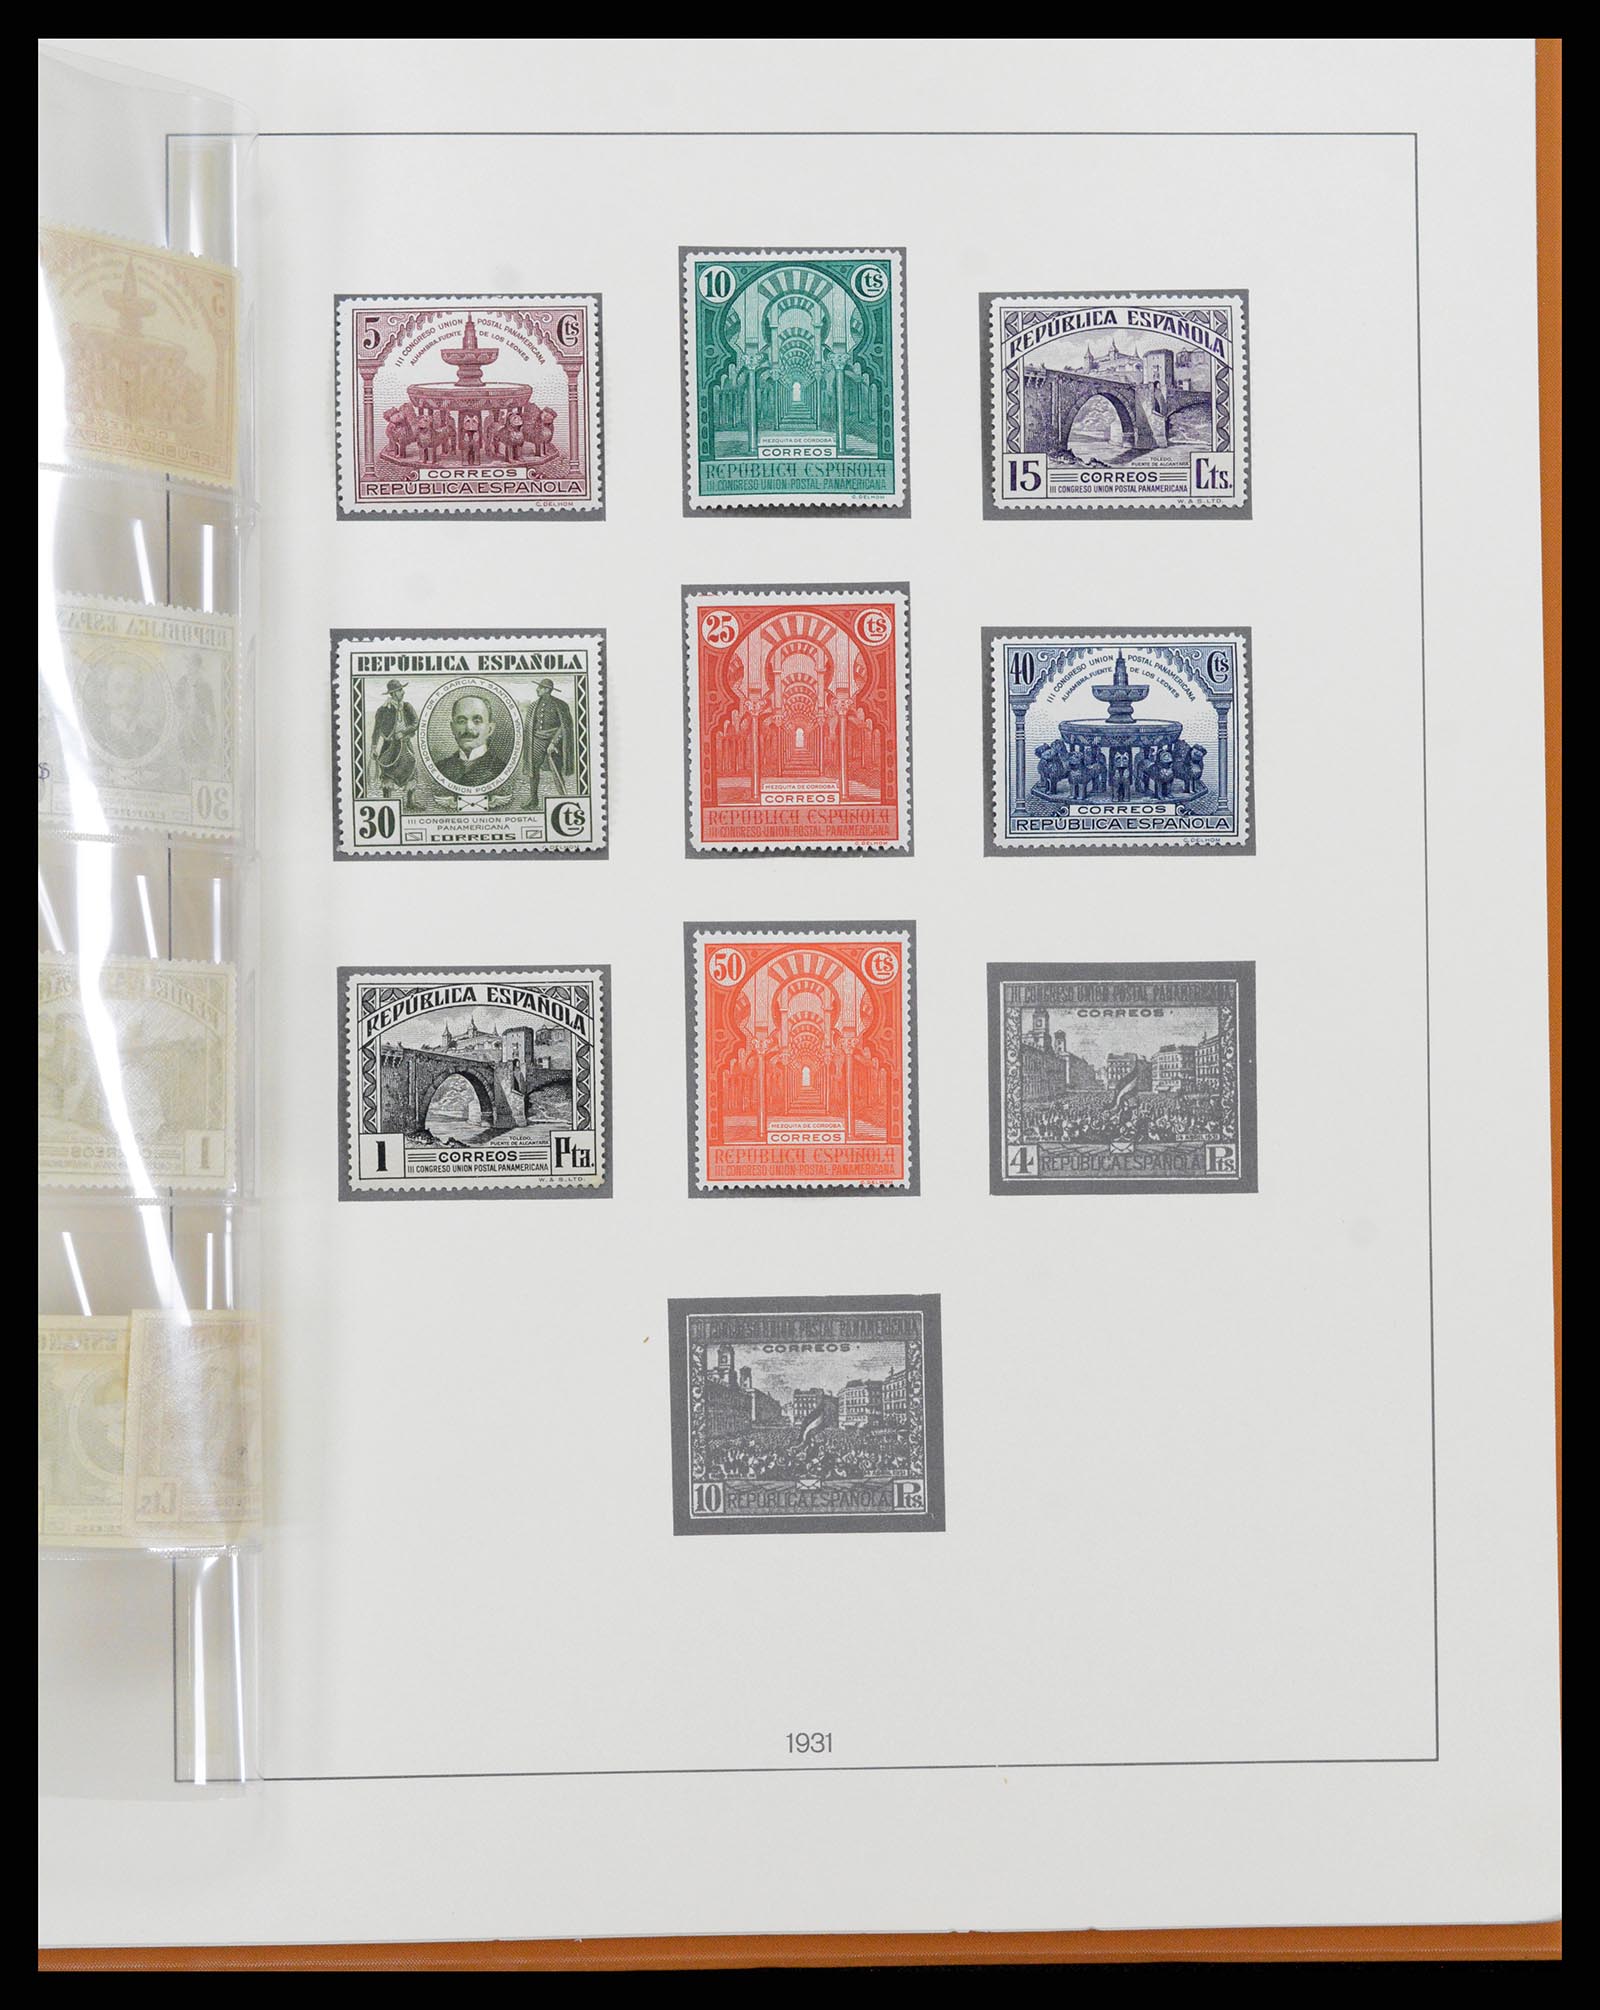 37126 063 - Stamp collection 37126 Spain and colonies 1850-1976.